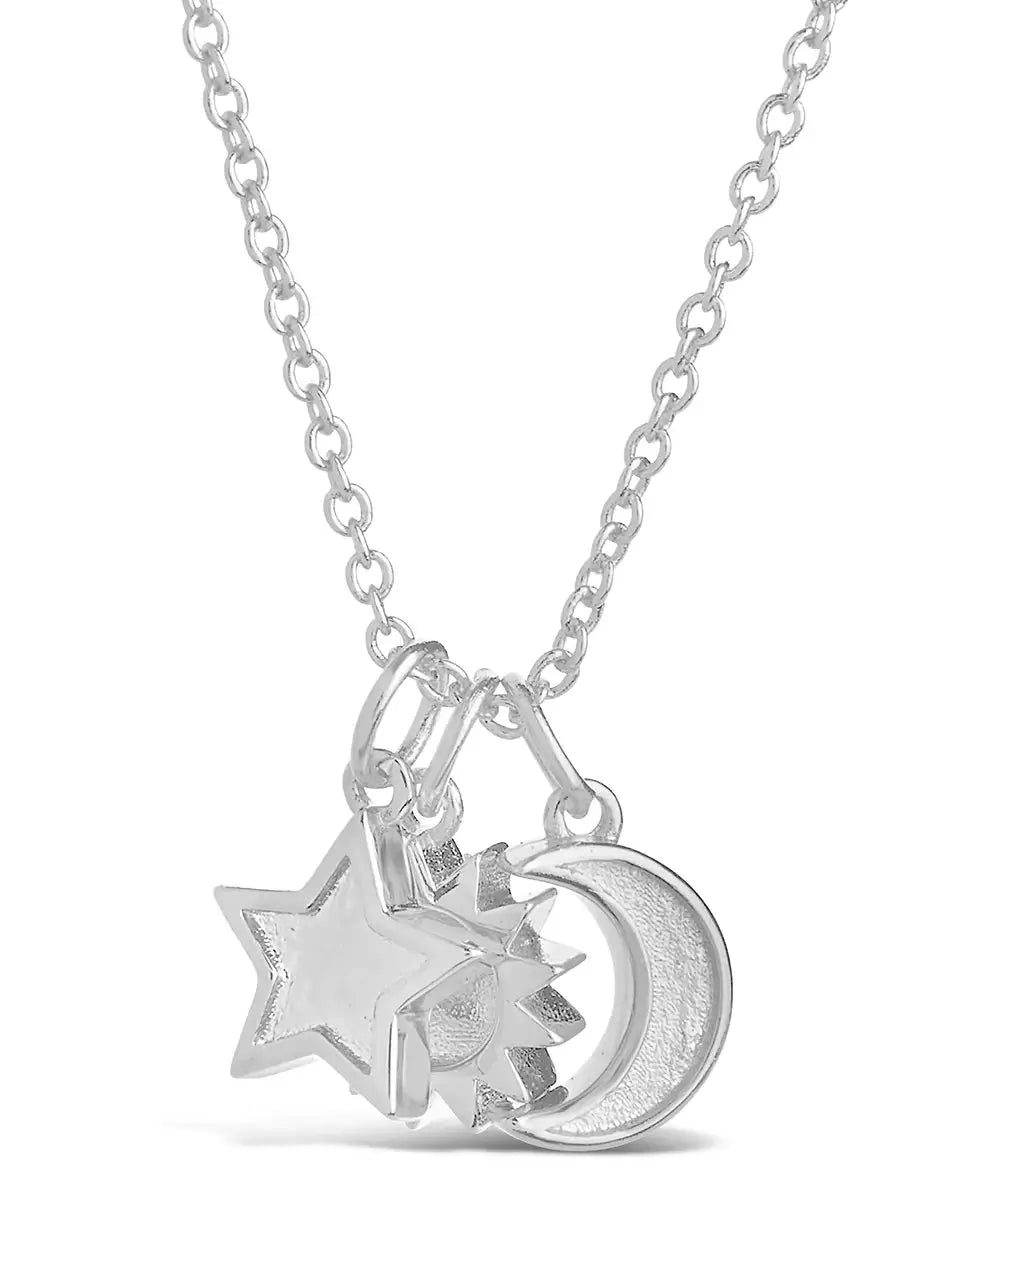 Sun, Moon, and Star Necklace Necklace Sterling Forever Silver 